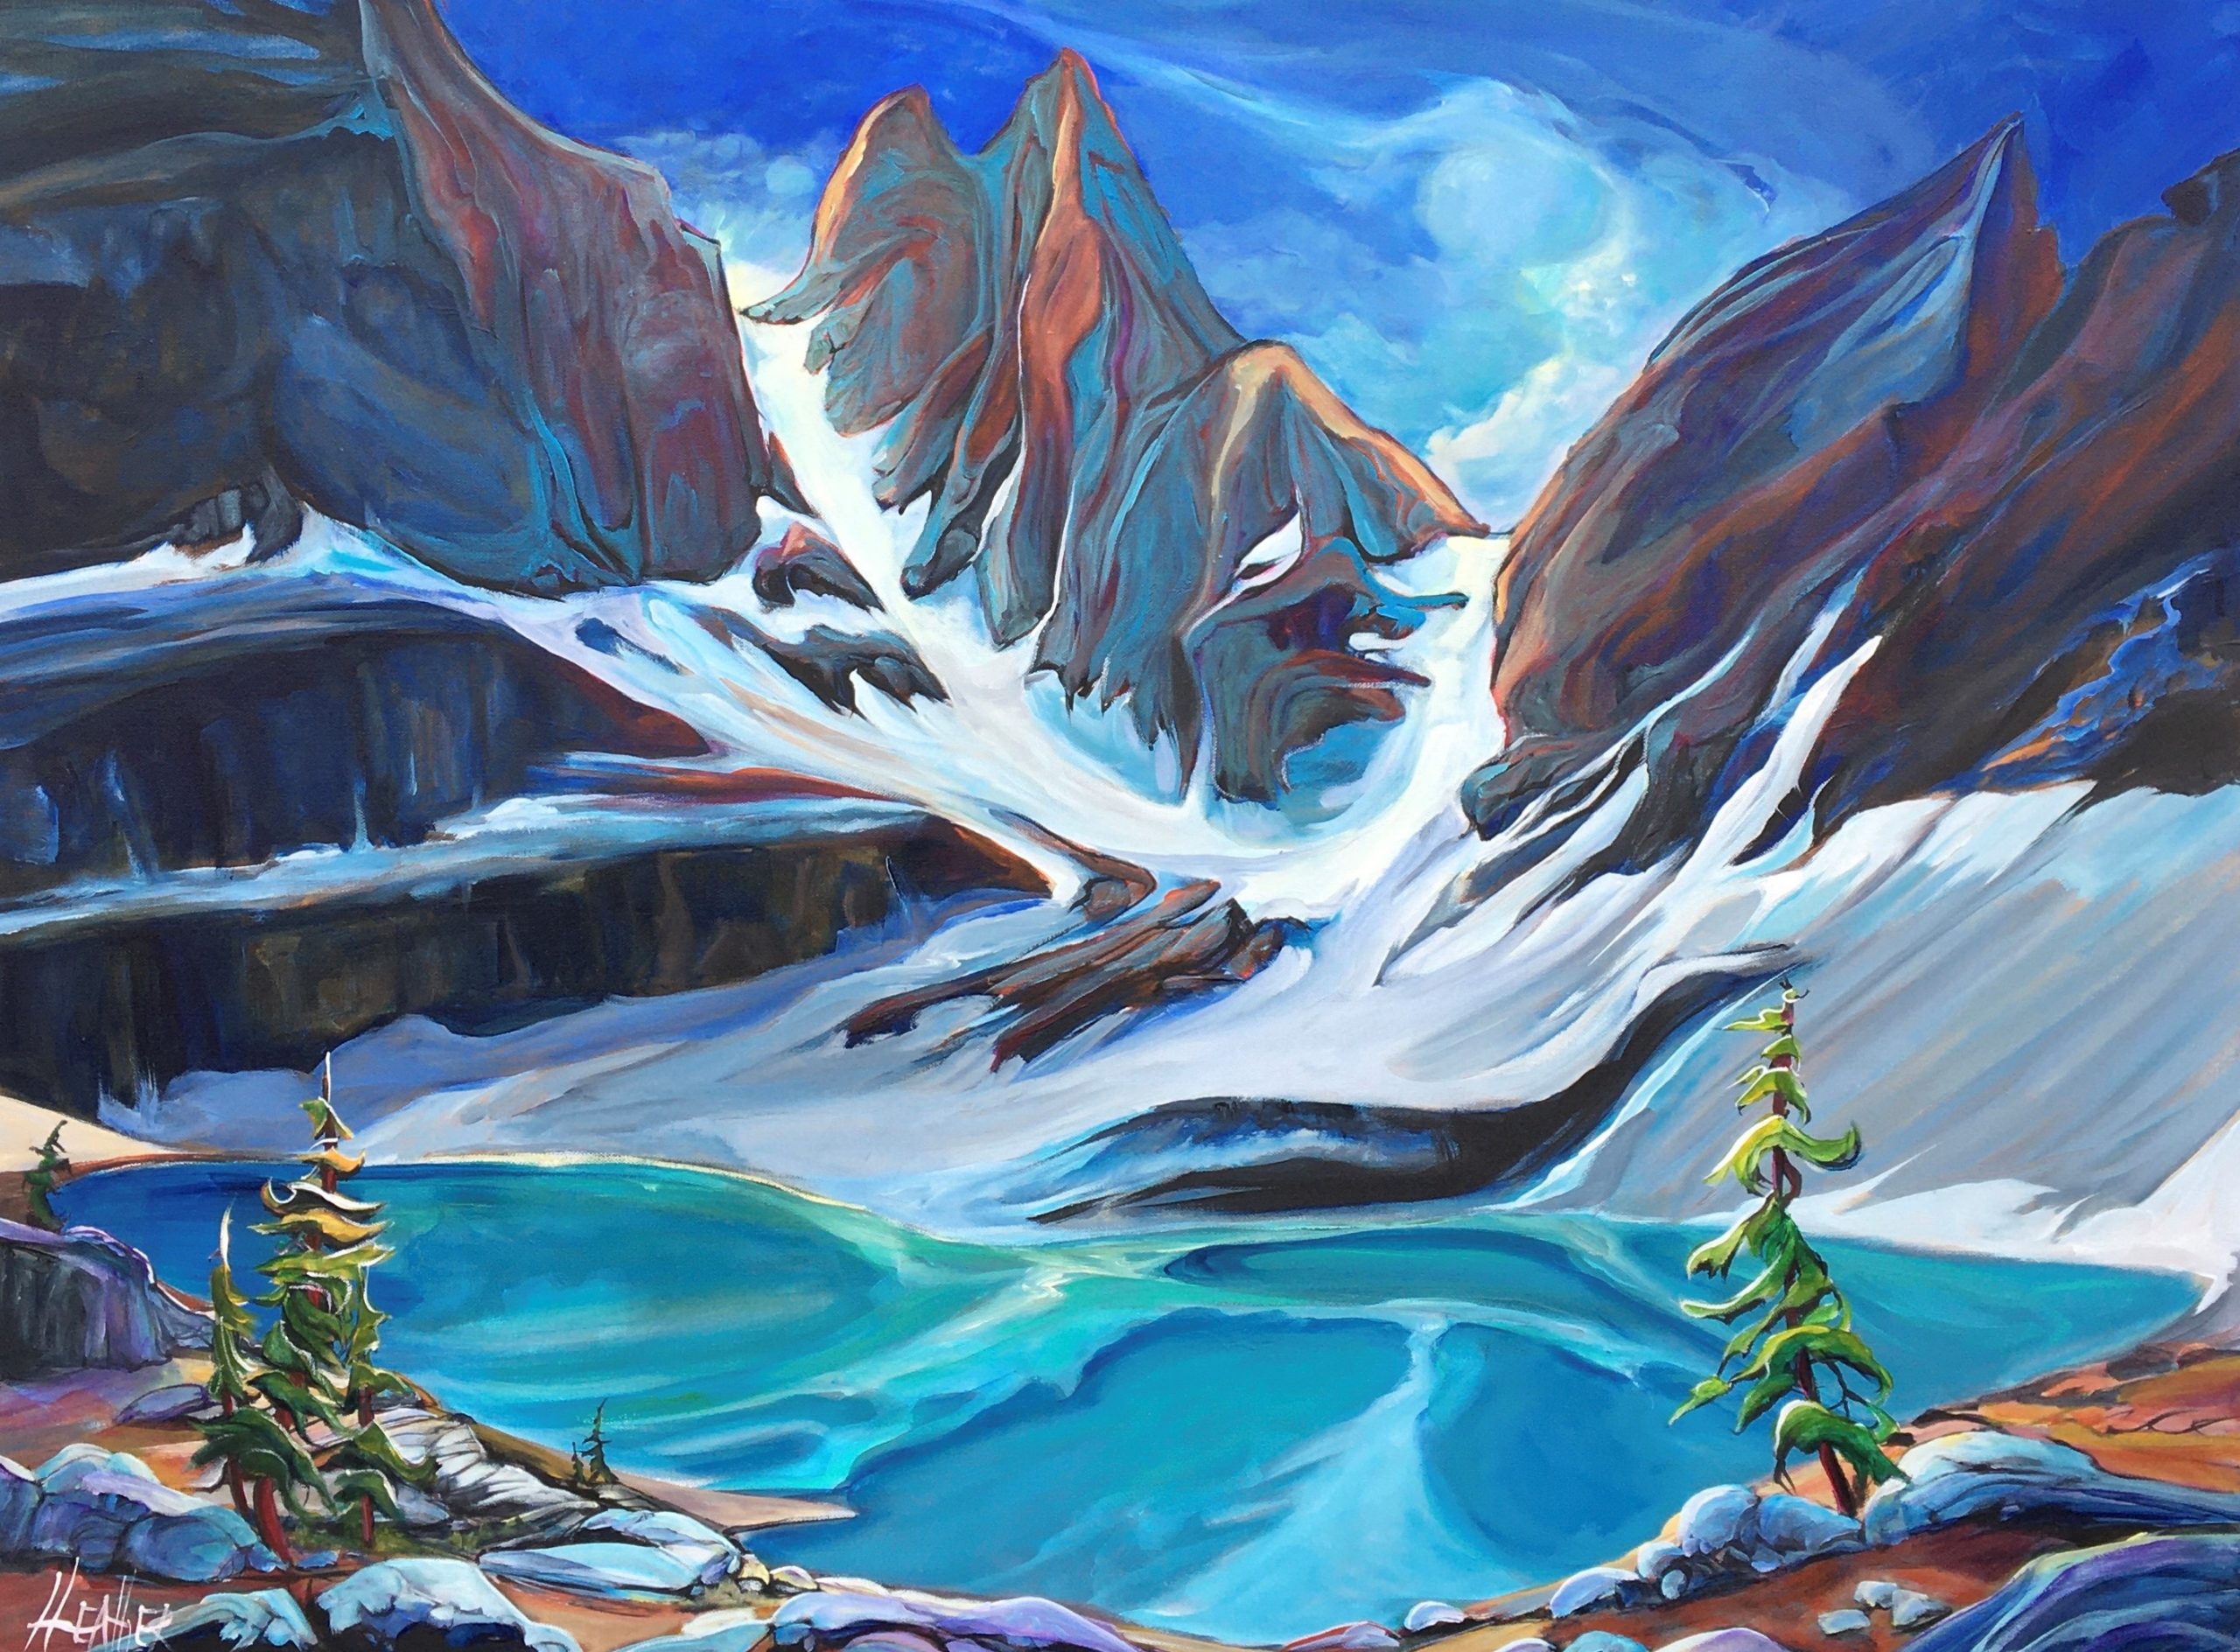 Opulence of Oesa, acrylic landscape painting by Heather Pant | Effusion Art Gallery + Cast Glass Studio, Invermere BC